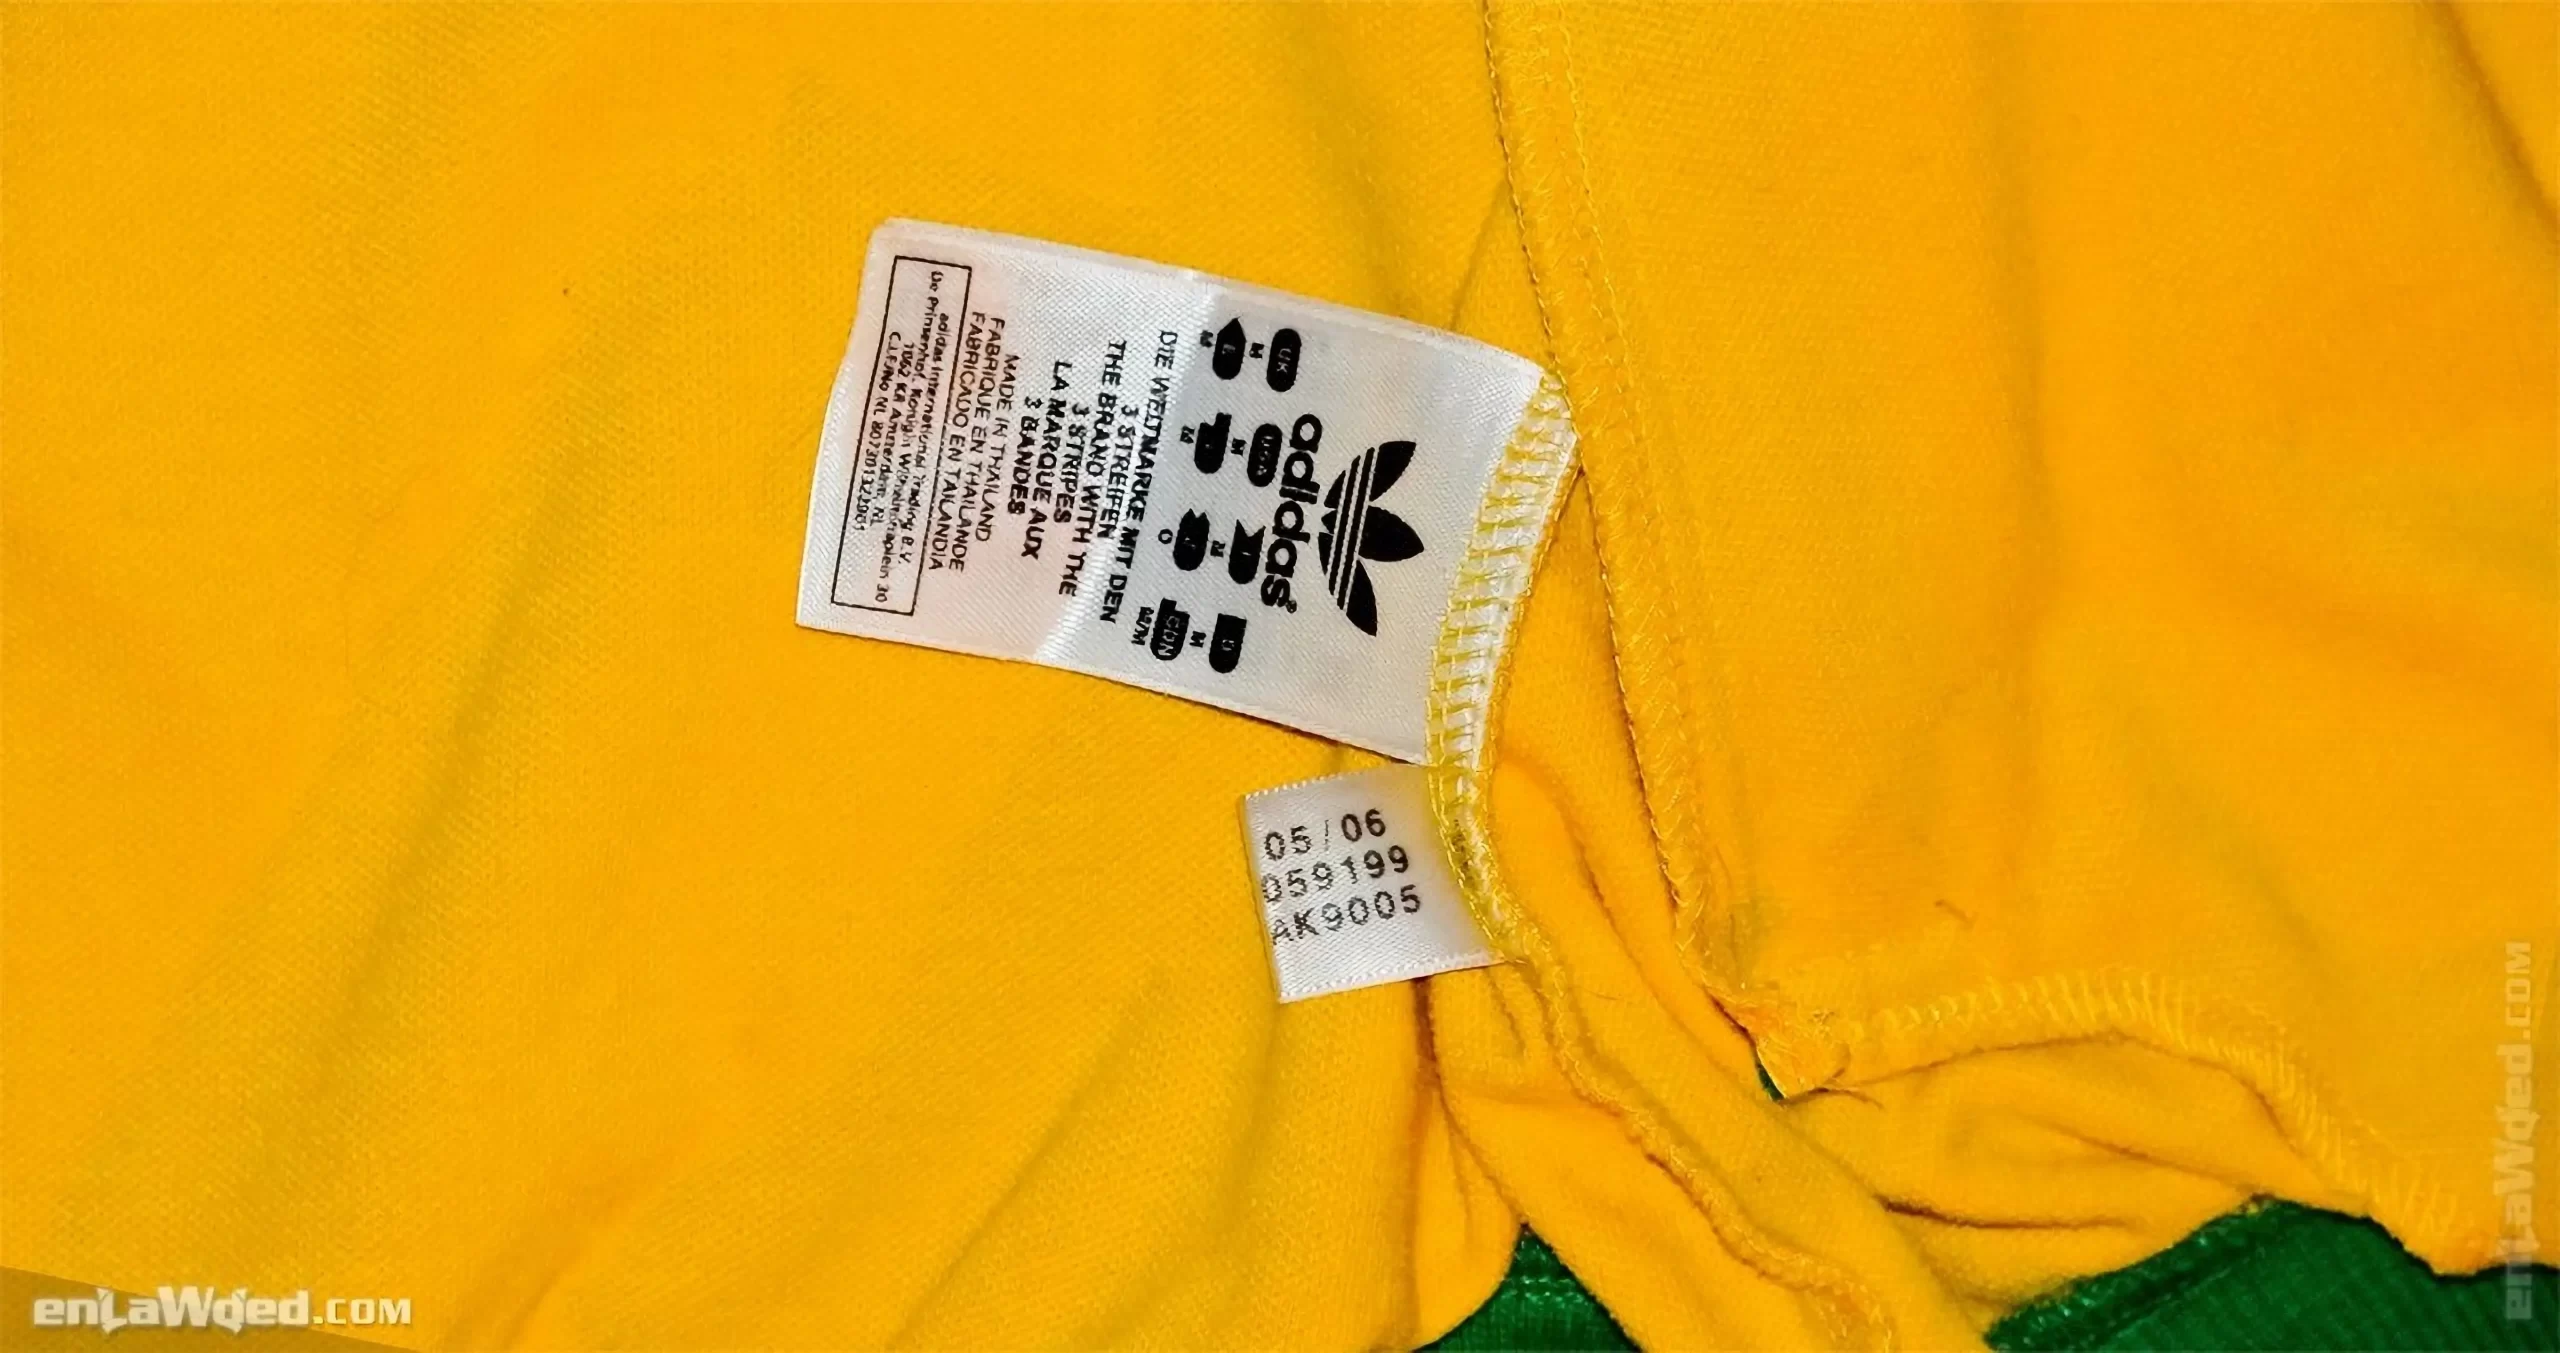 Adidas tag of the Rio jacket, with the month and year of fabrication: 05/2006